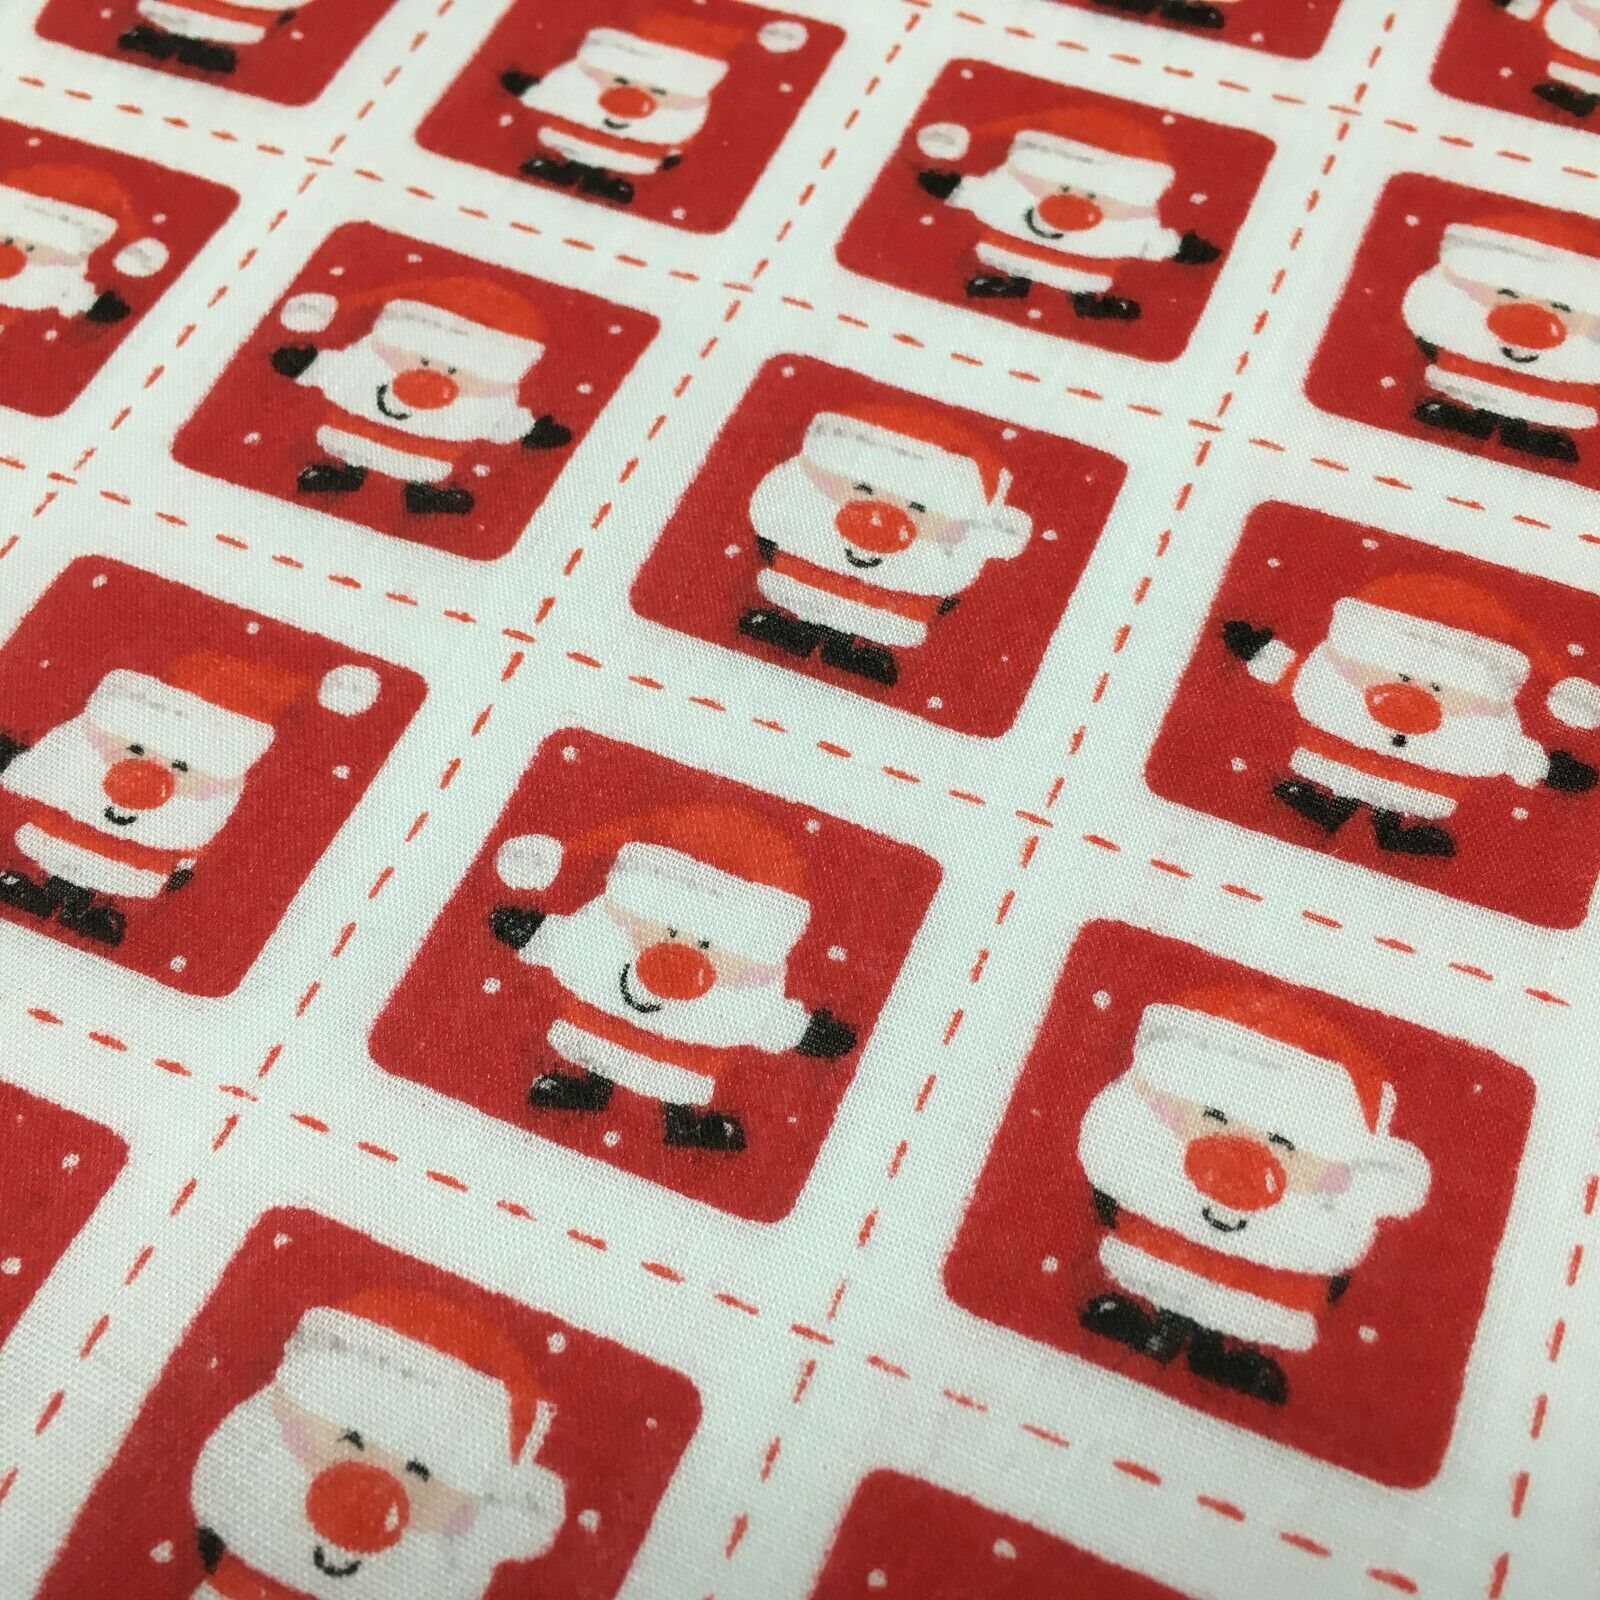 Father Christmas Stamp Printed Polycotton Fabric 110 cm MD1284 Mtex